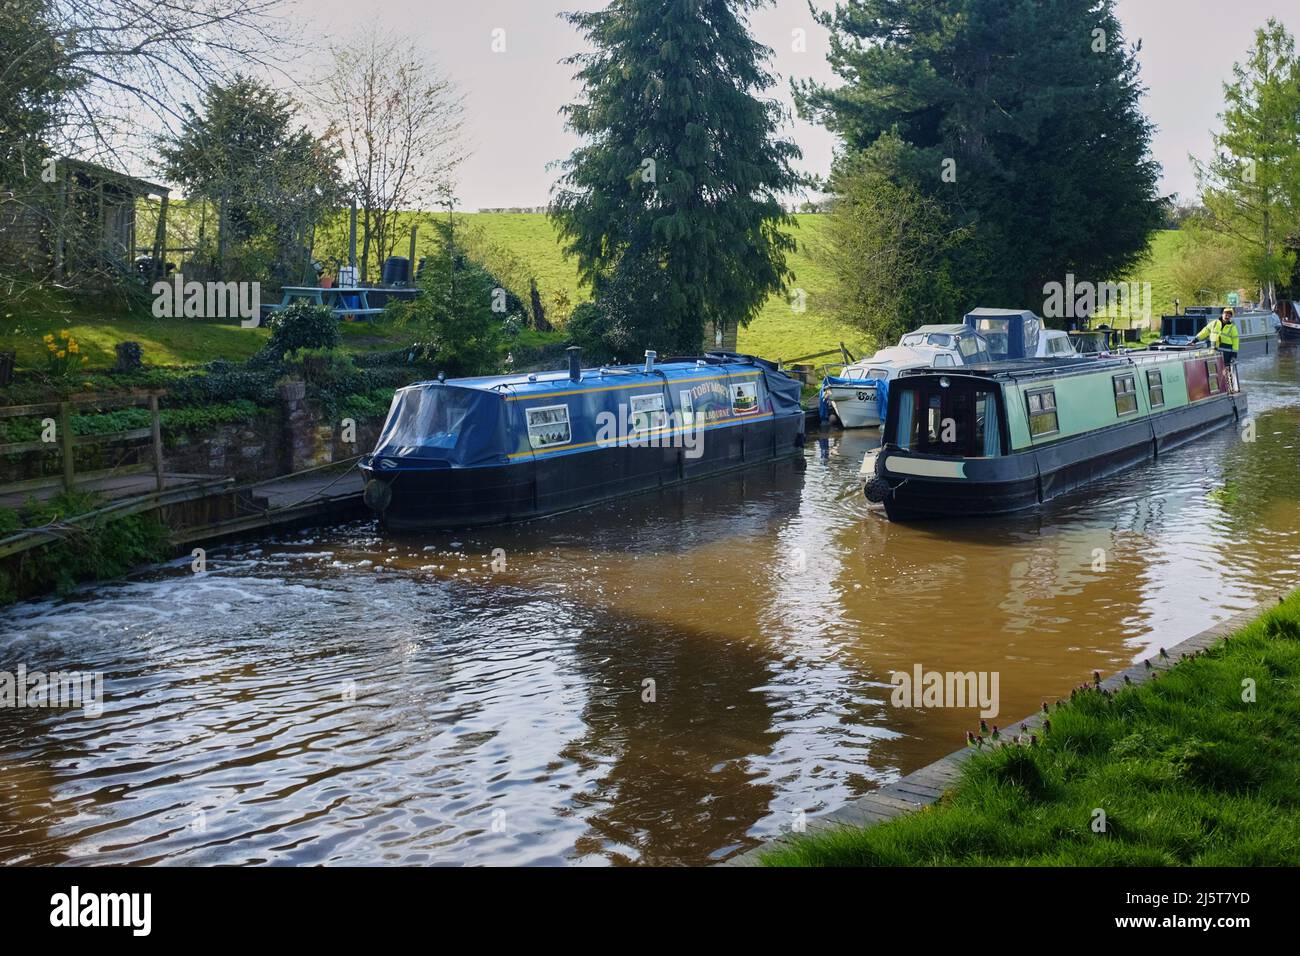 A narrow boat passing another moored one with other moored boats in the background on the Shropshire Union canal near Audlem, Cheshire, UK Stock Photo